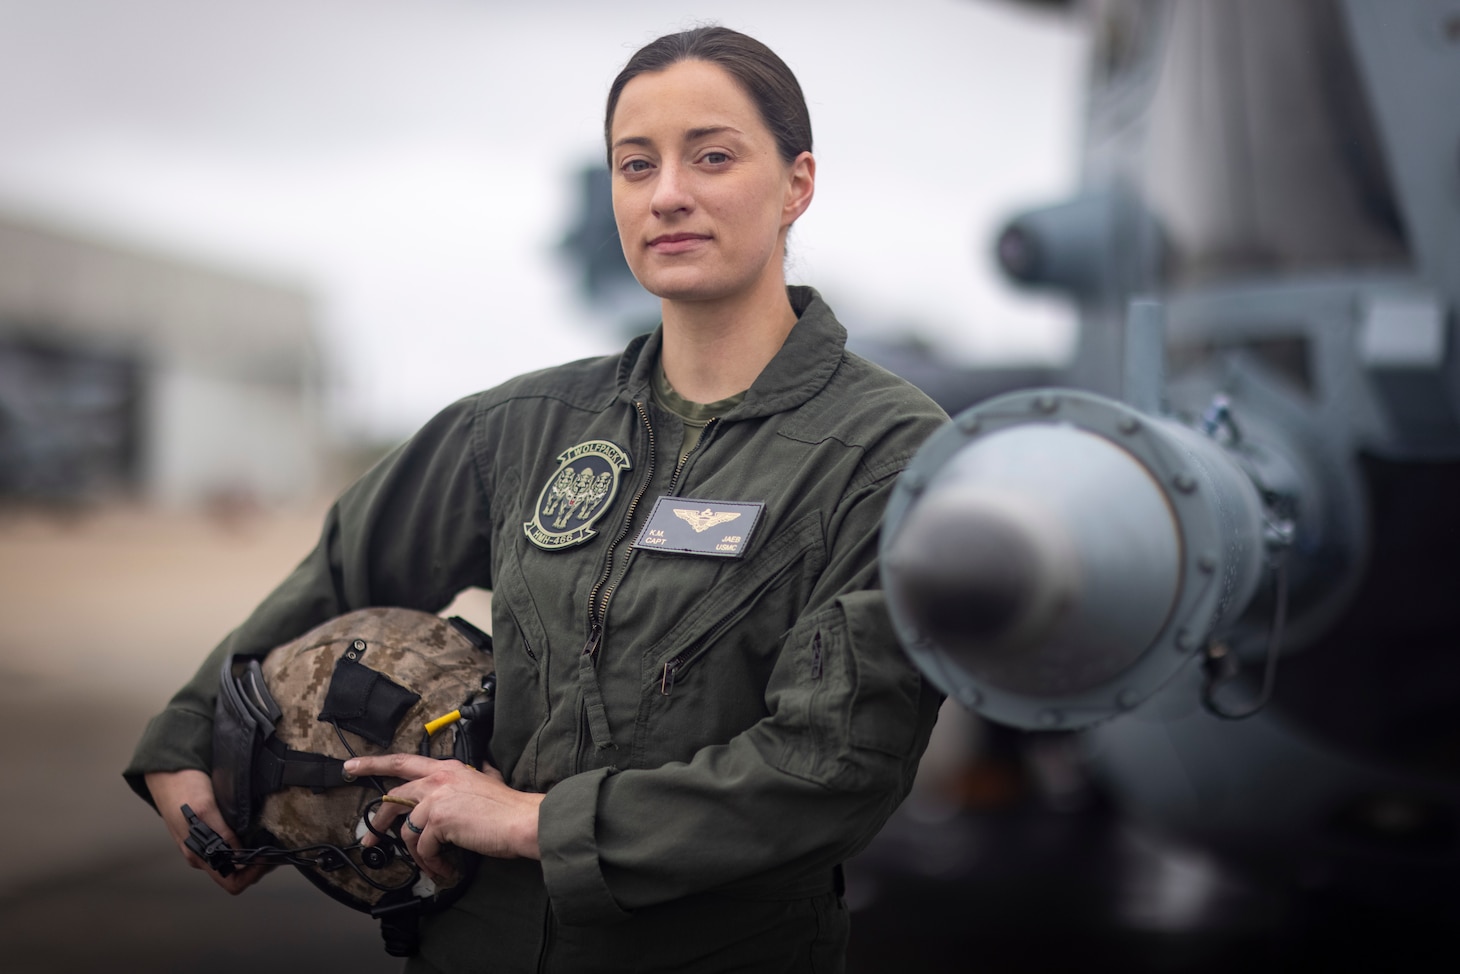 Capt. Karah “Gobbles” Jaeb, Marine Corps
Current Sections Leader and Night Operations Instructor, CH-53K pilot with HMH-466